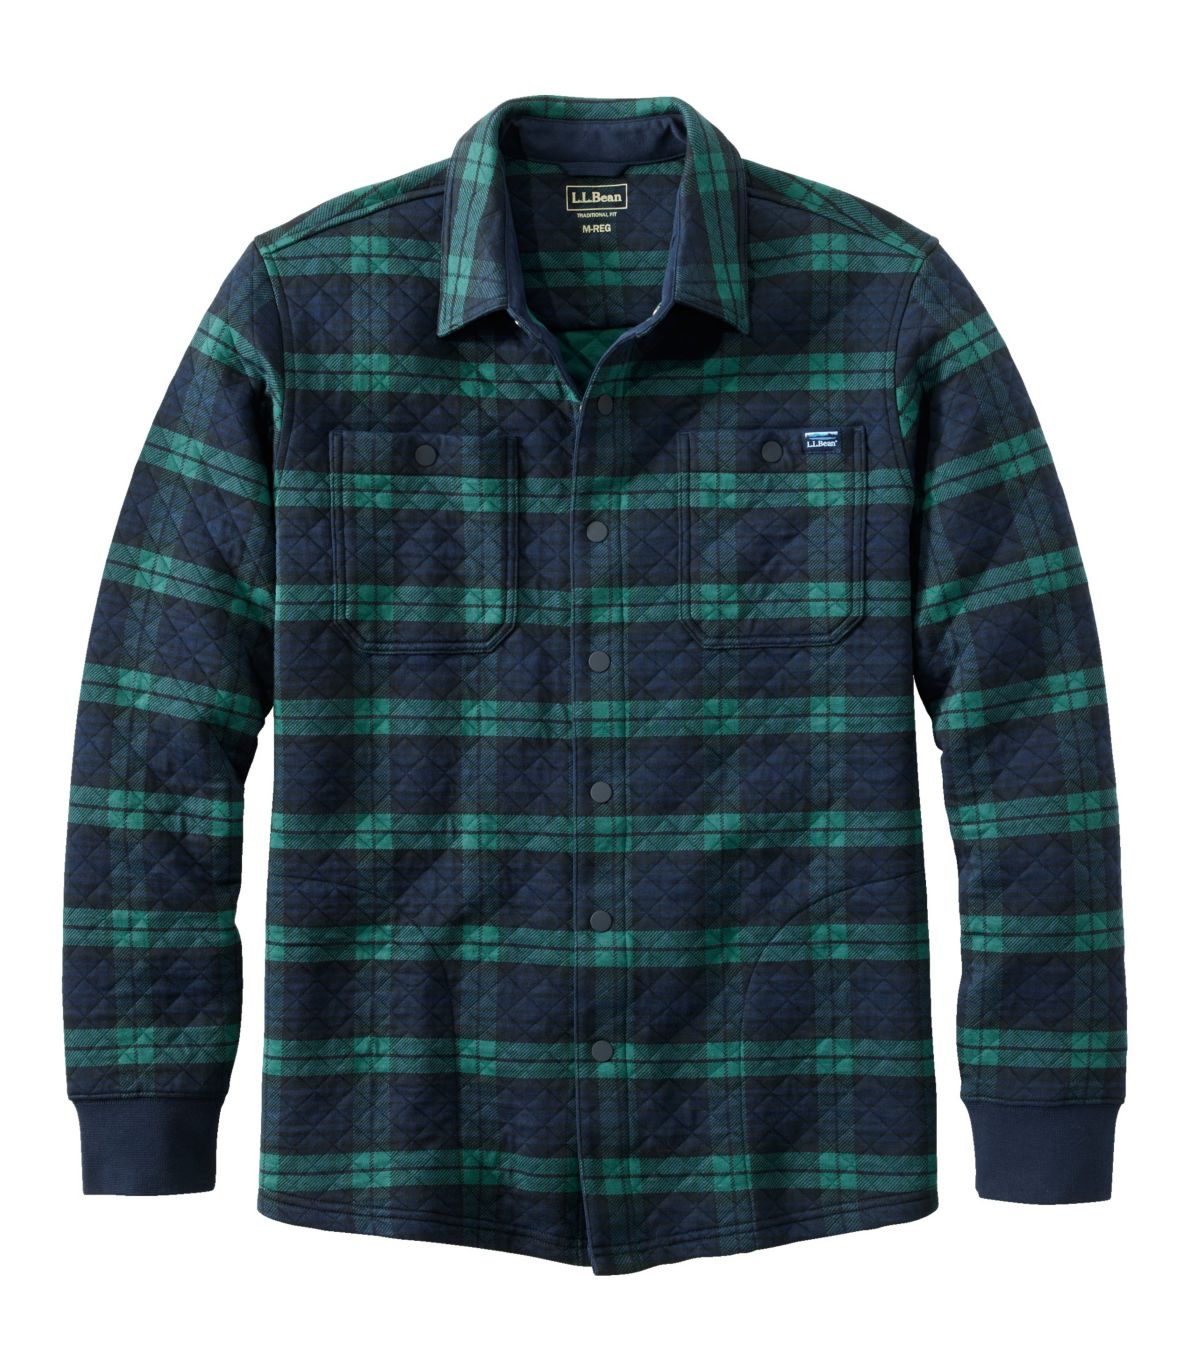 Men's Quilted Sweatshirts, Snap Overshirt, Plaid